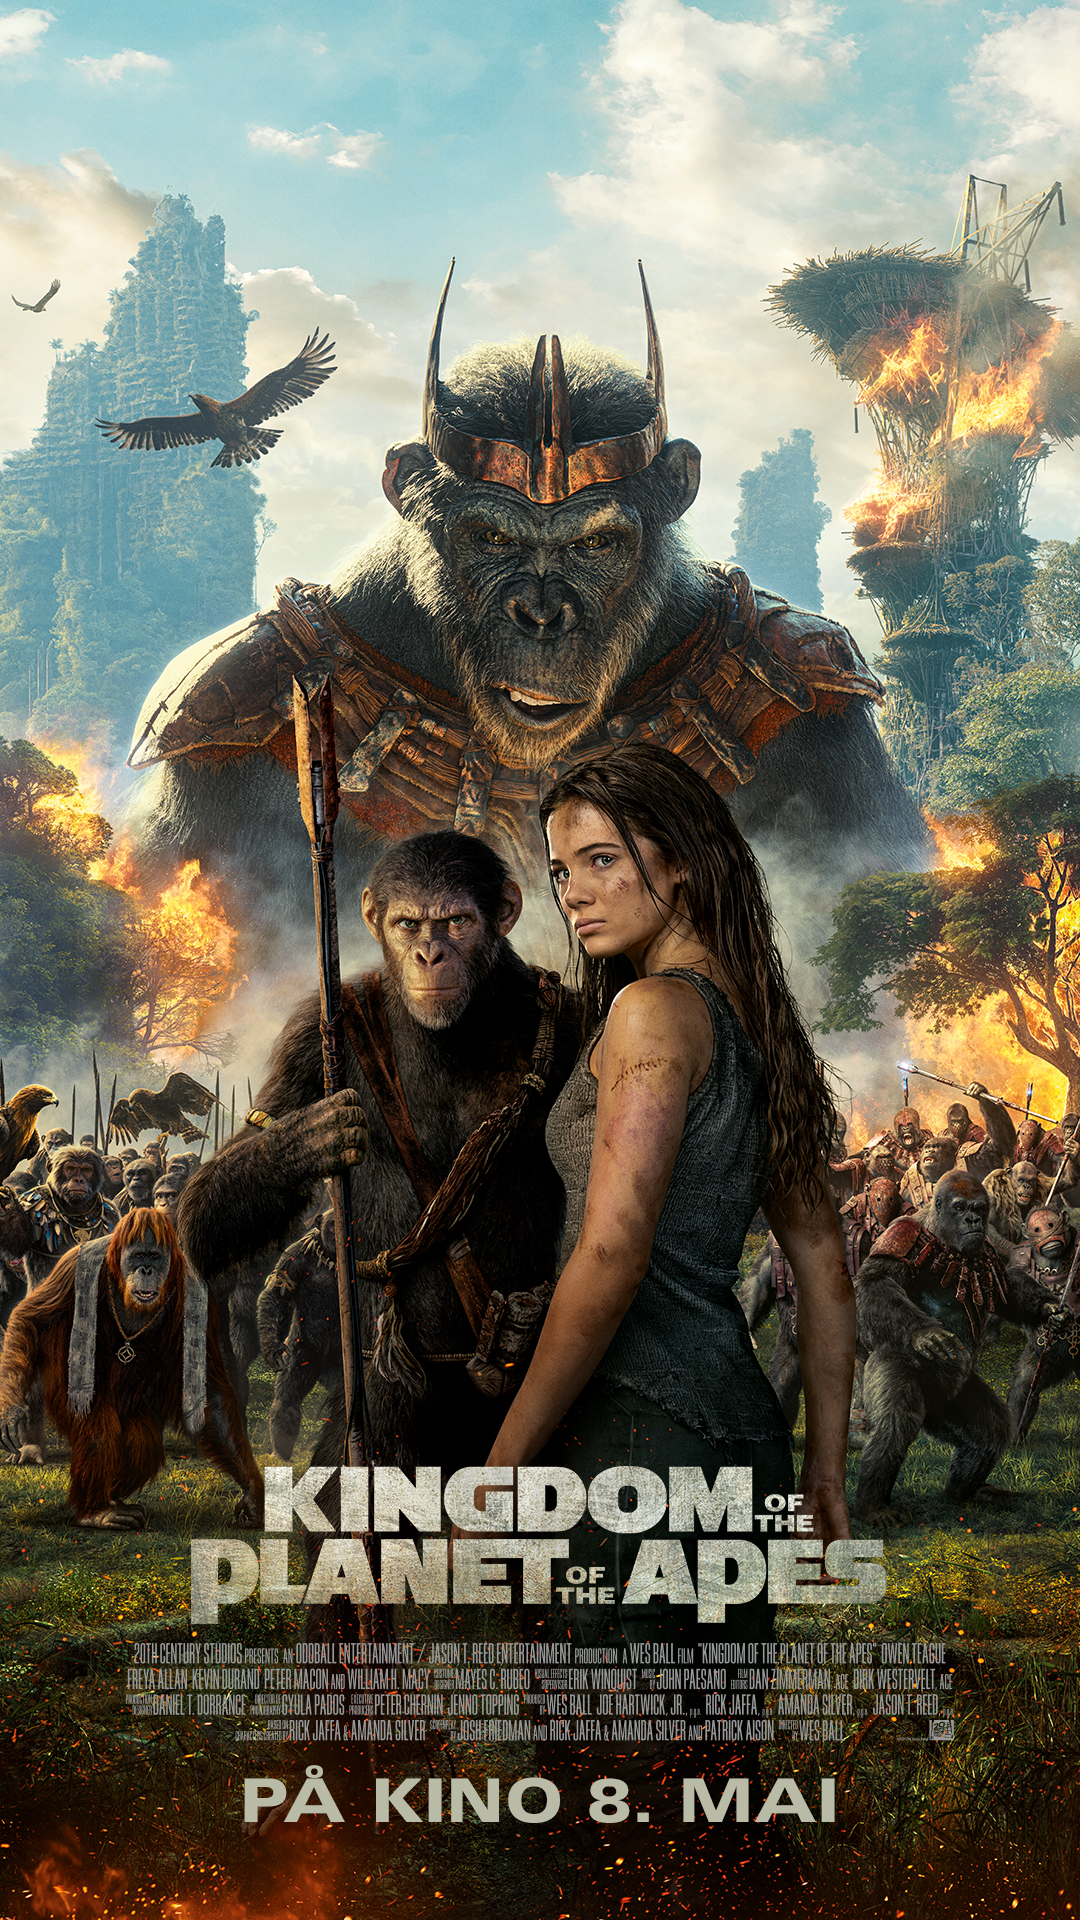 Kinoplakat for Kingdom of the Planet of the Apes